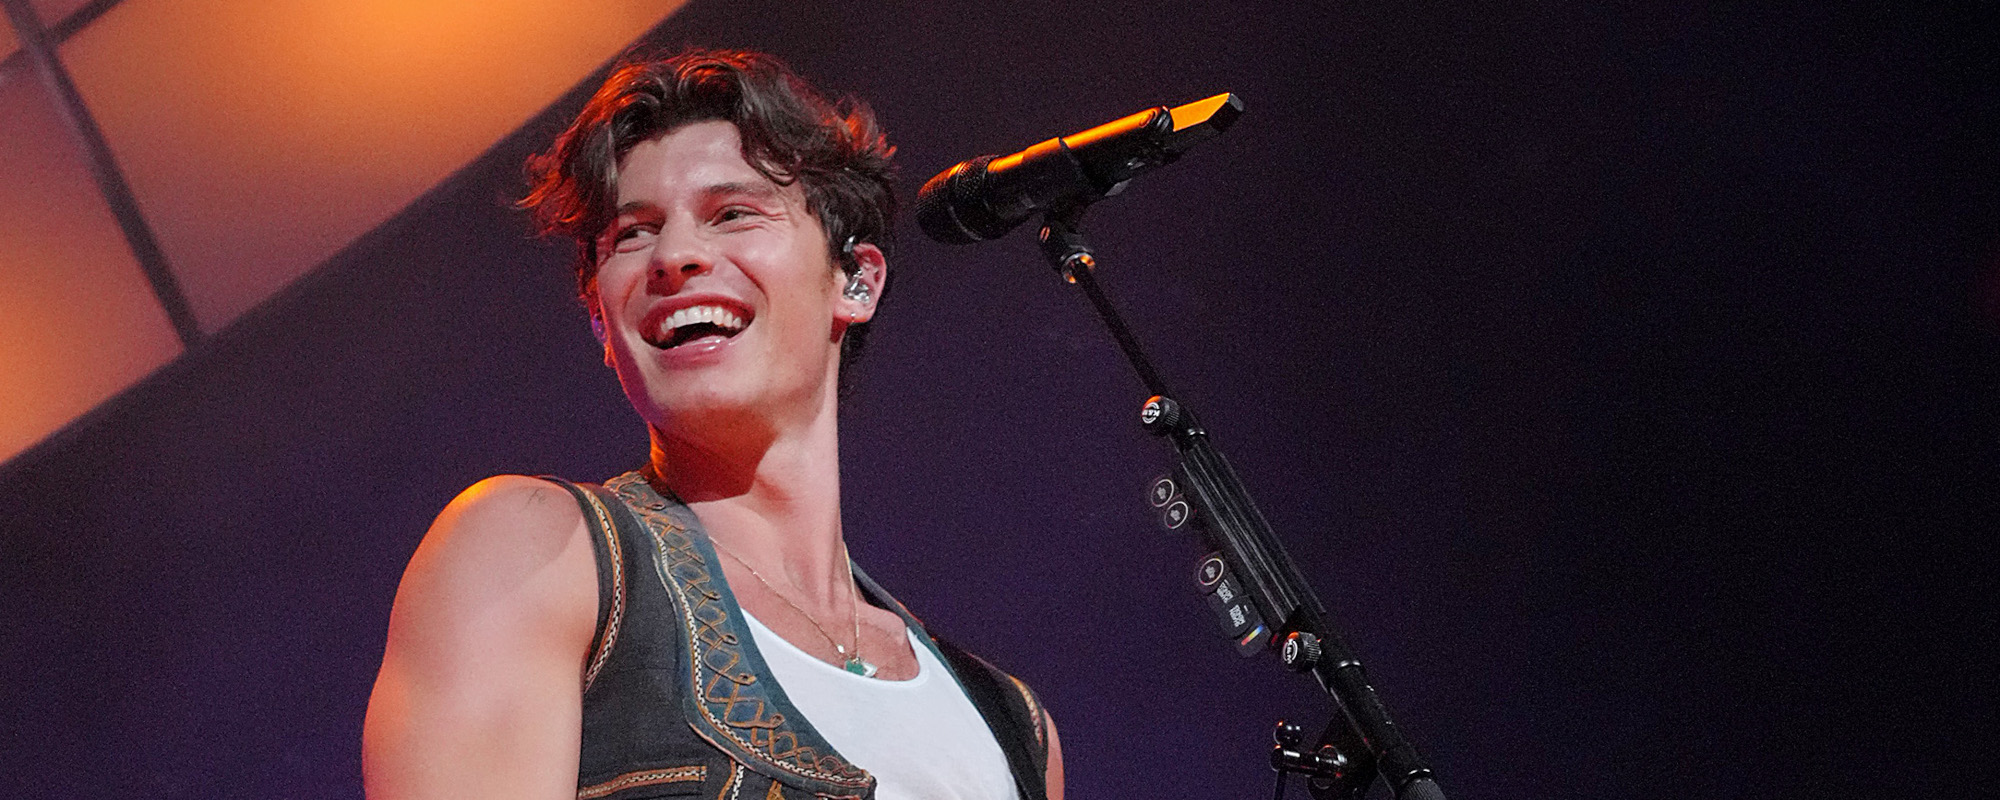 Shawn Mendes Releases Surprise Track “What The Hell Are We Dying For” About Canadian Wildfires